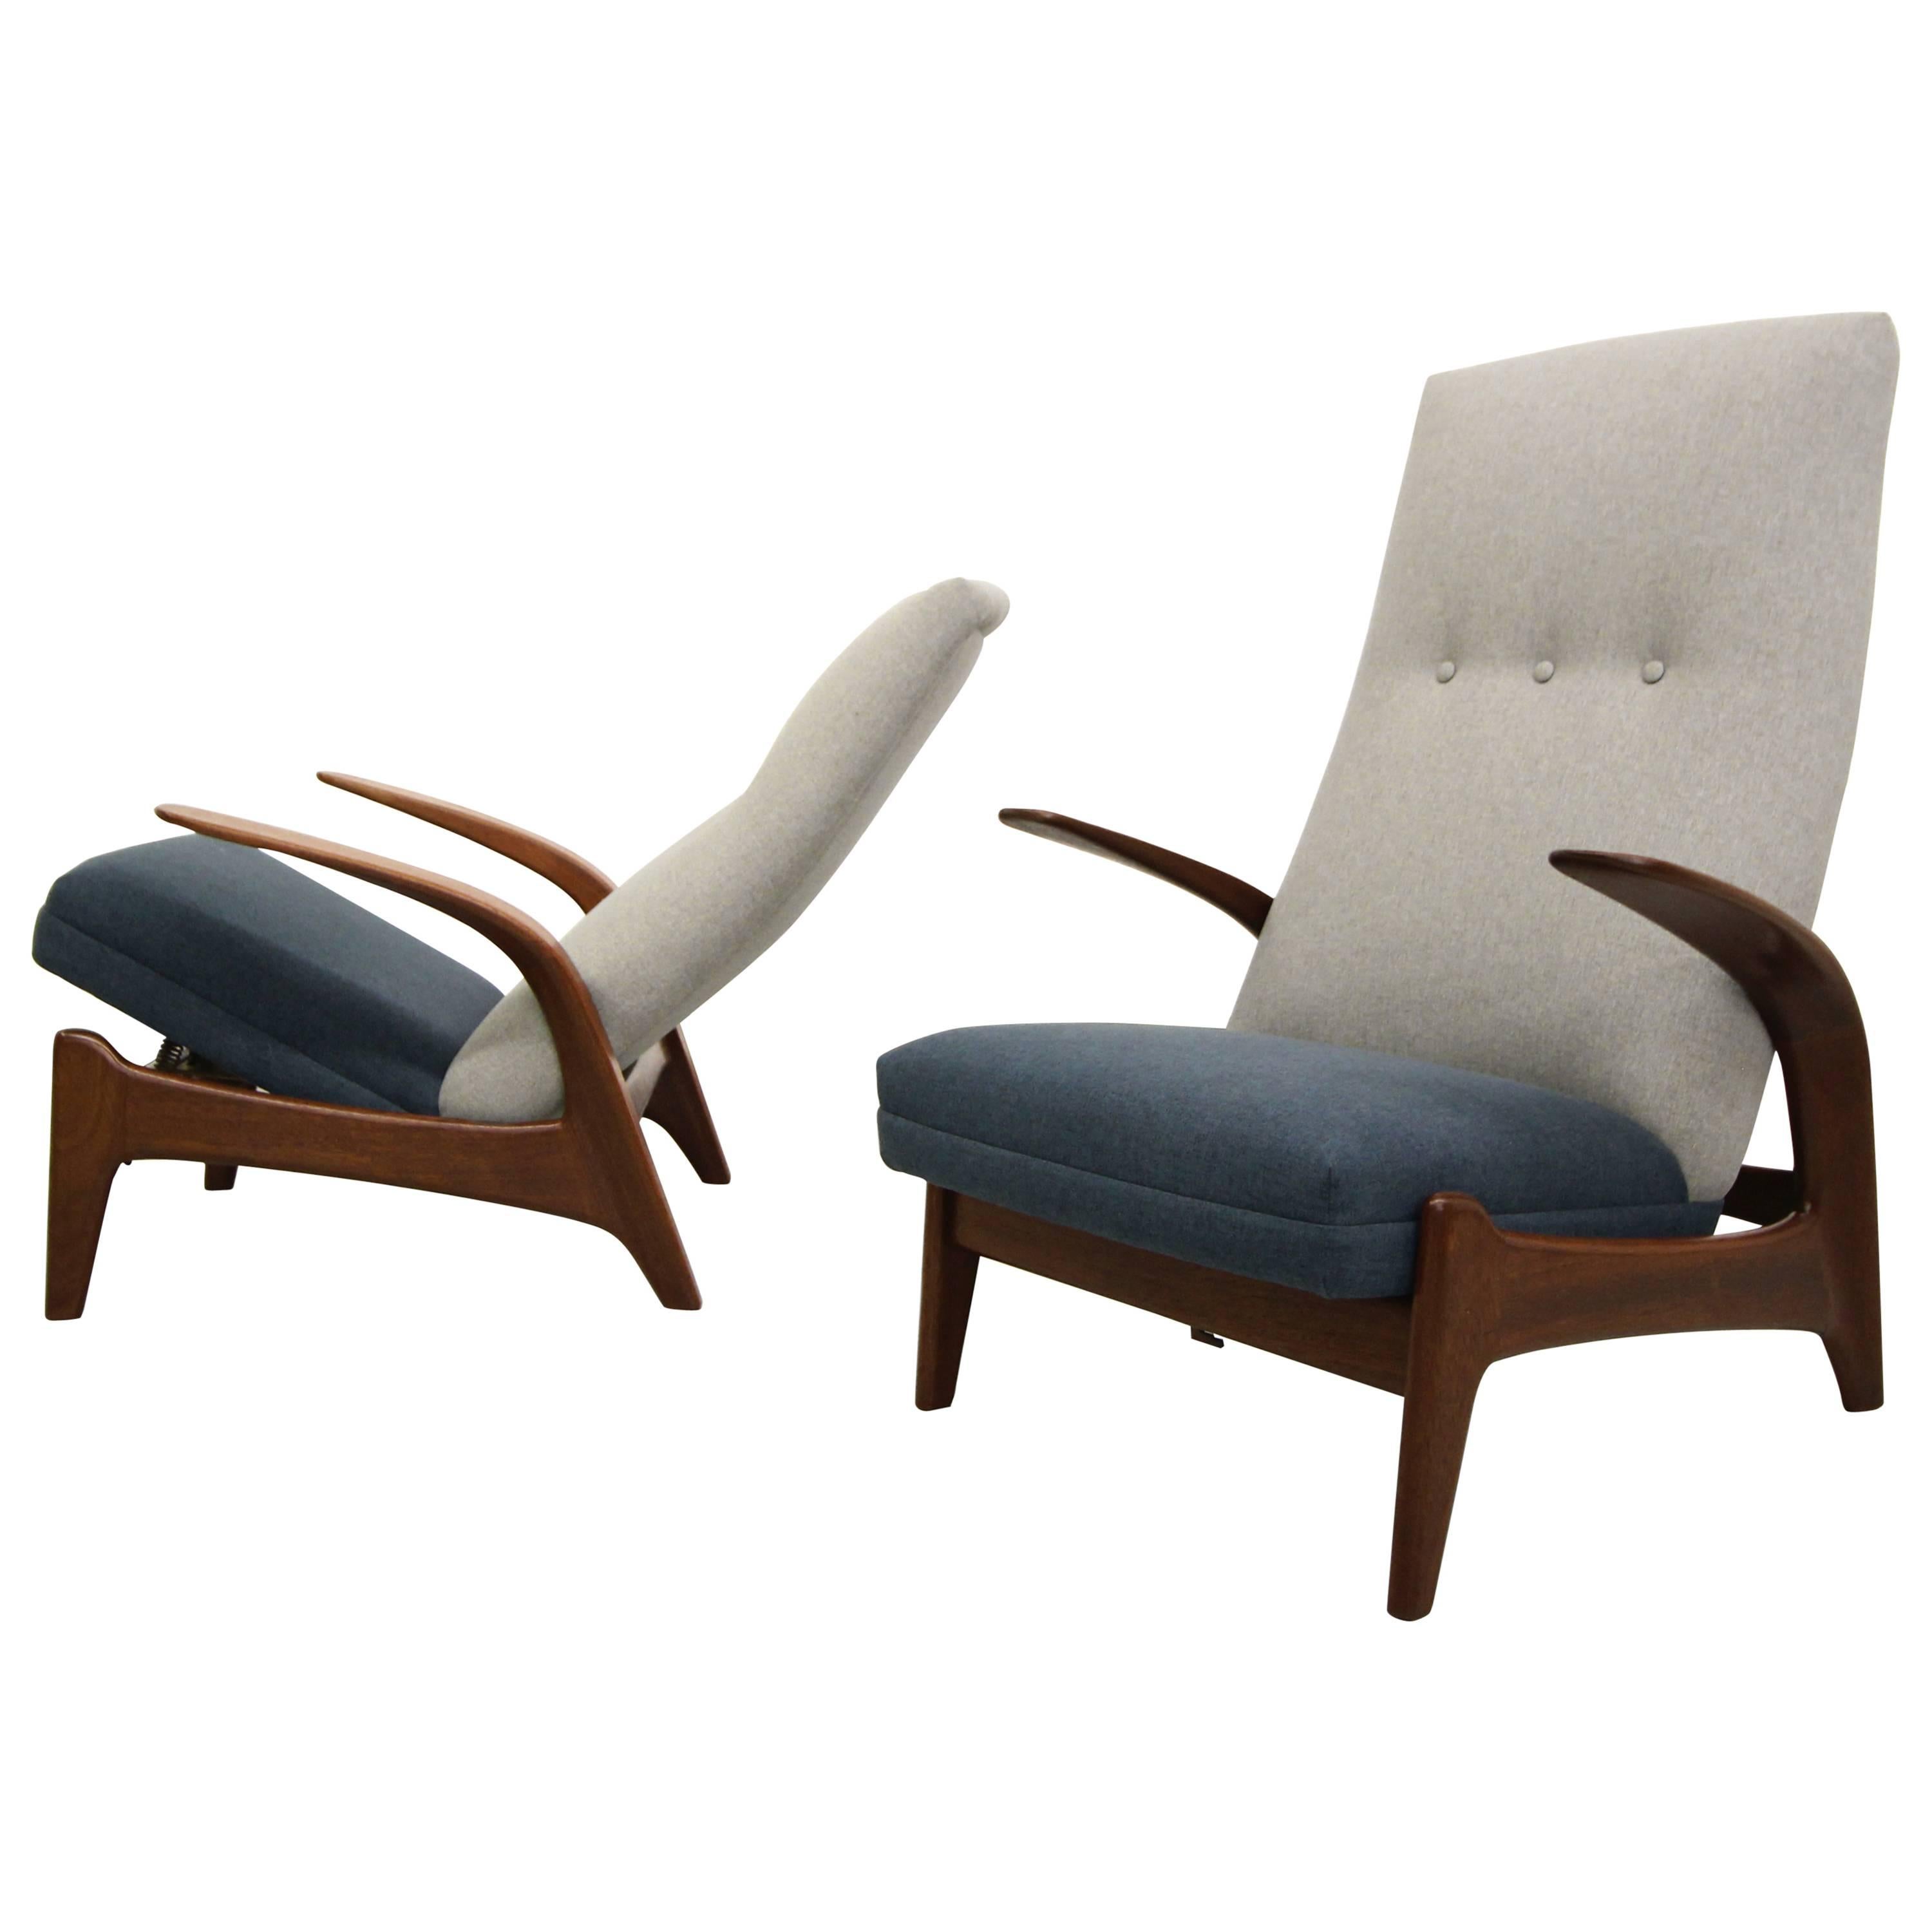 Pair of Mid Century Rock'n Rest Chairs by Gimson Slater